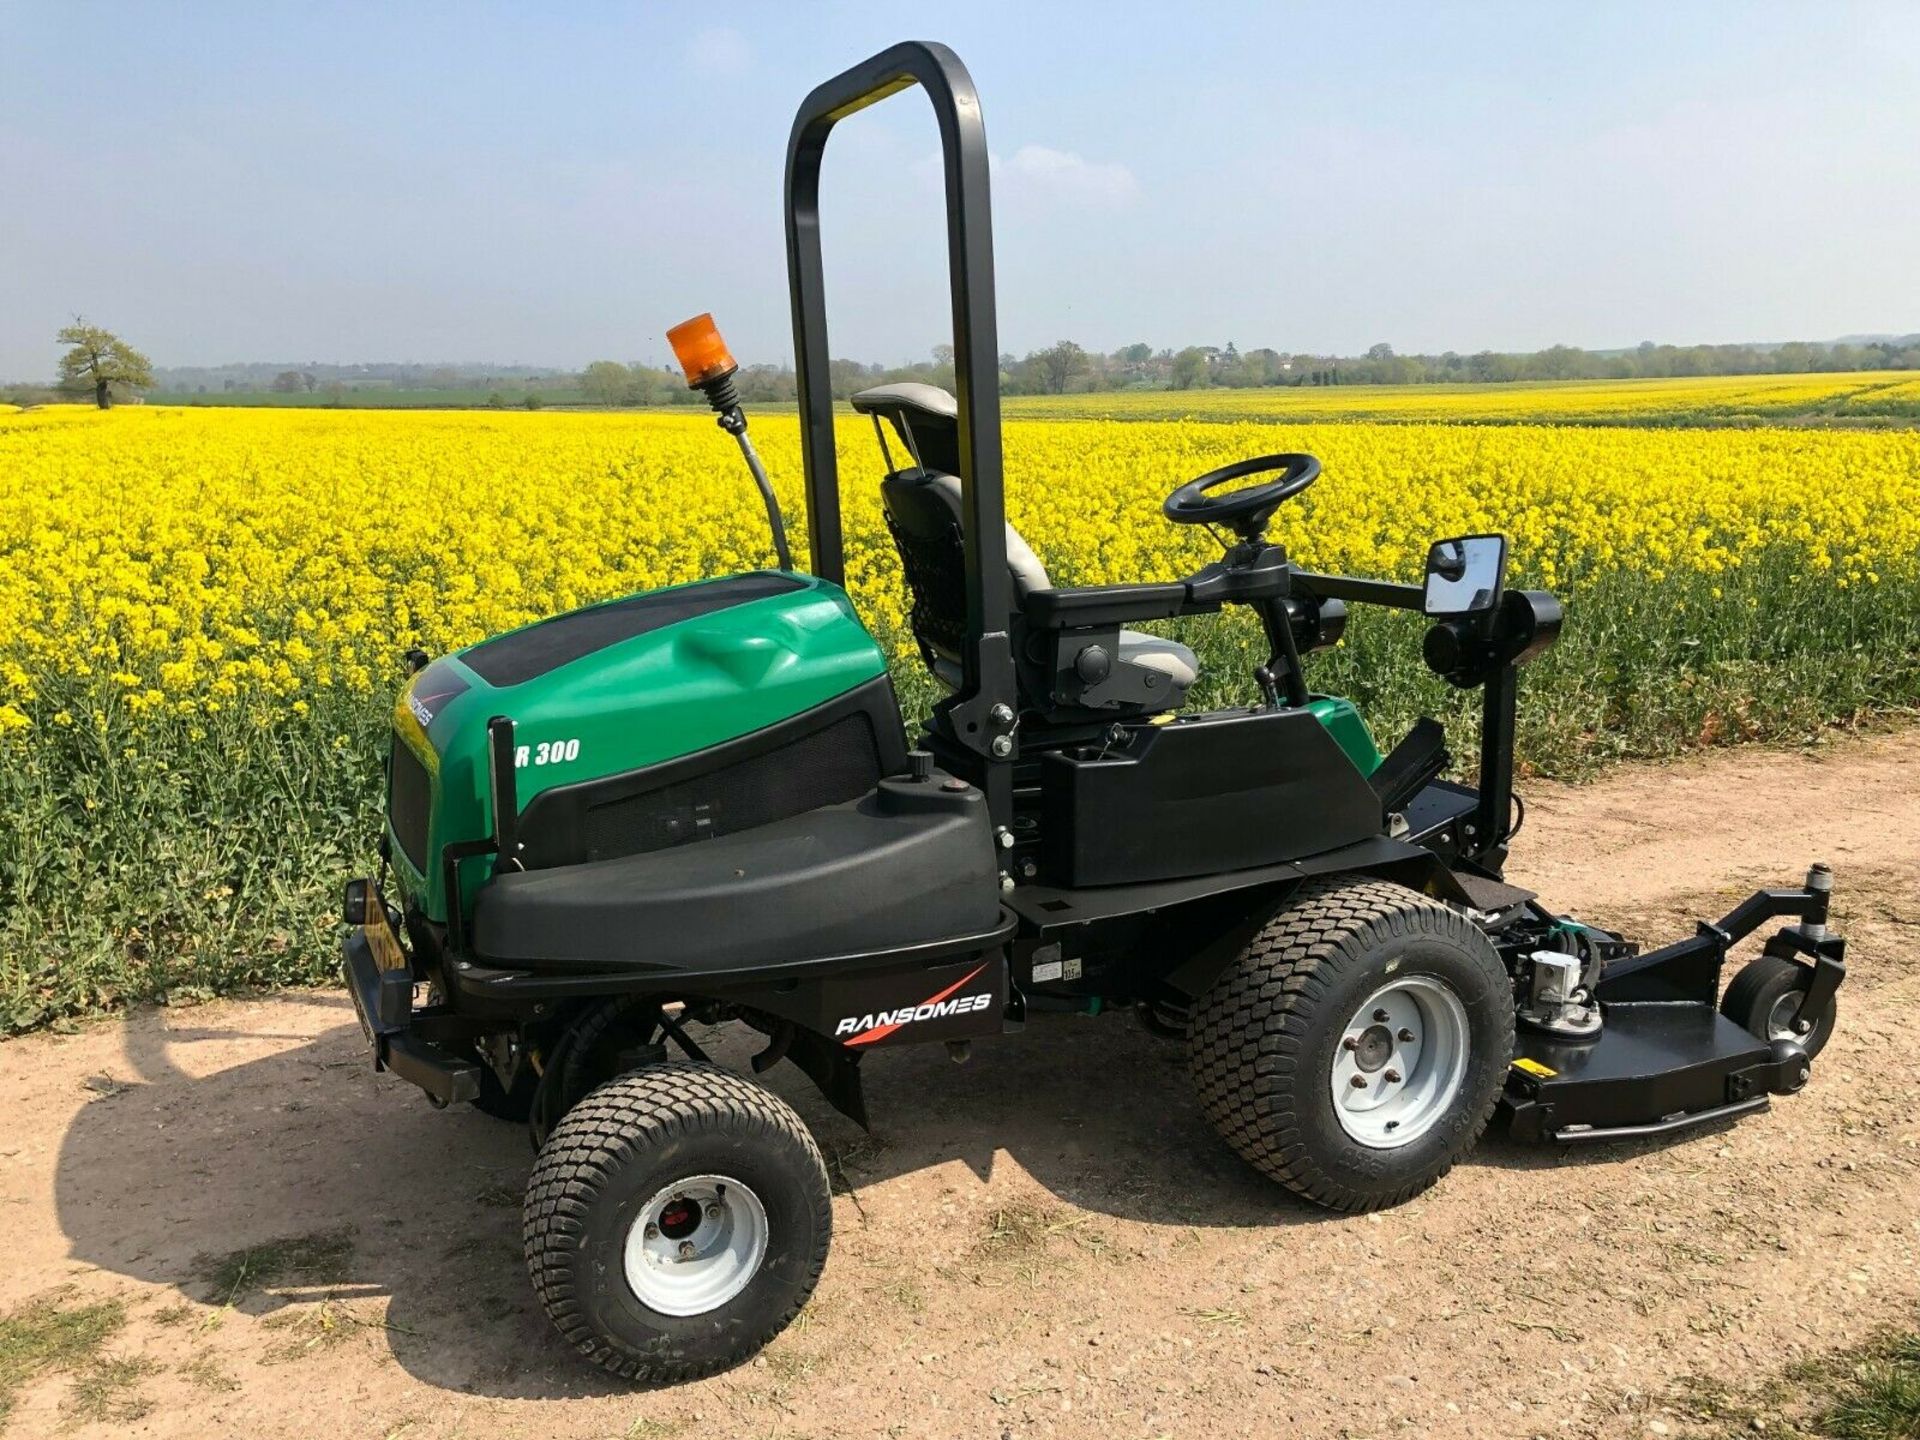 RANSOMES HR300 UPFRONT ROTARY MOWER, 60" CUT, HYDROSTATIC DRIVE, YEAR 2014, DIESEL, 4x4 *PLUS VAT* - Image 3 of 5